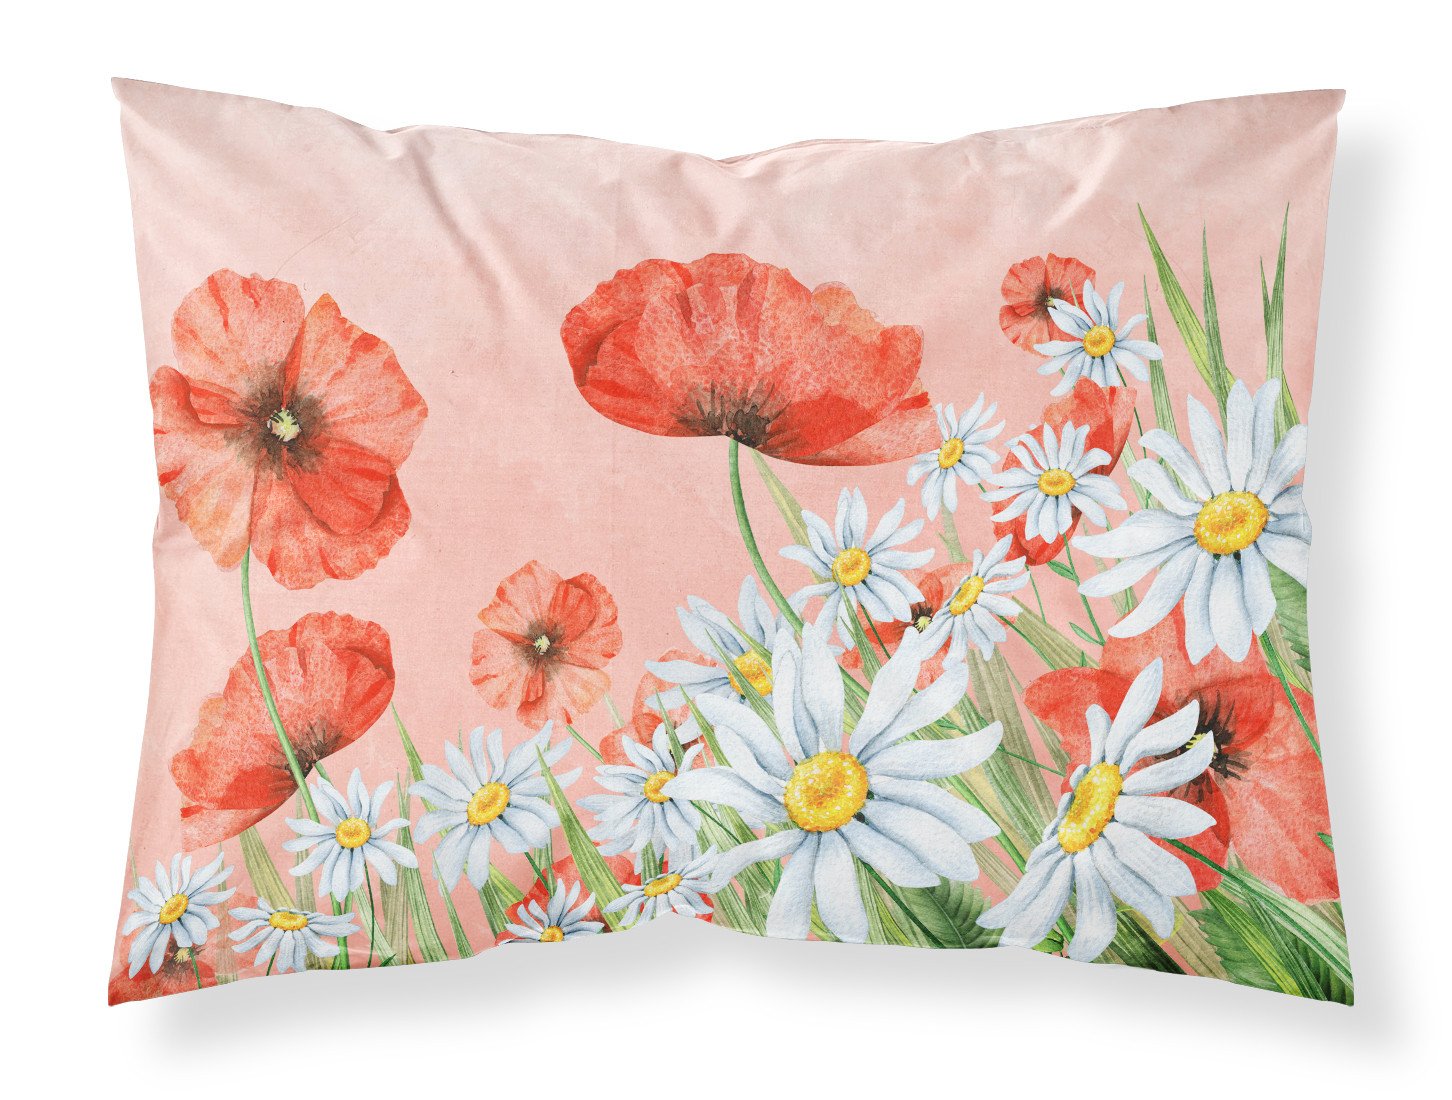 Poppies and Chamomiles Fabric Standard Pillowcase BB7448PILLOWCASE by Caroline's Treasures